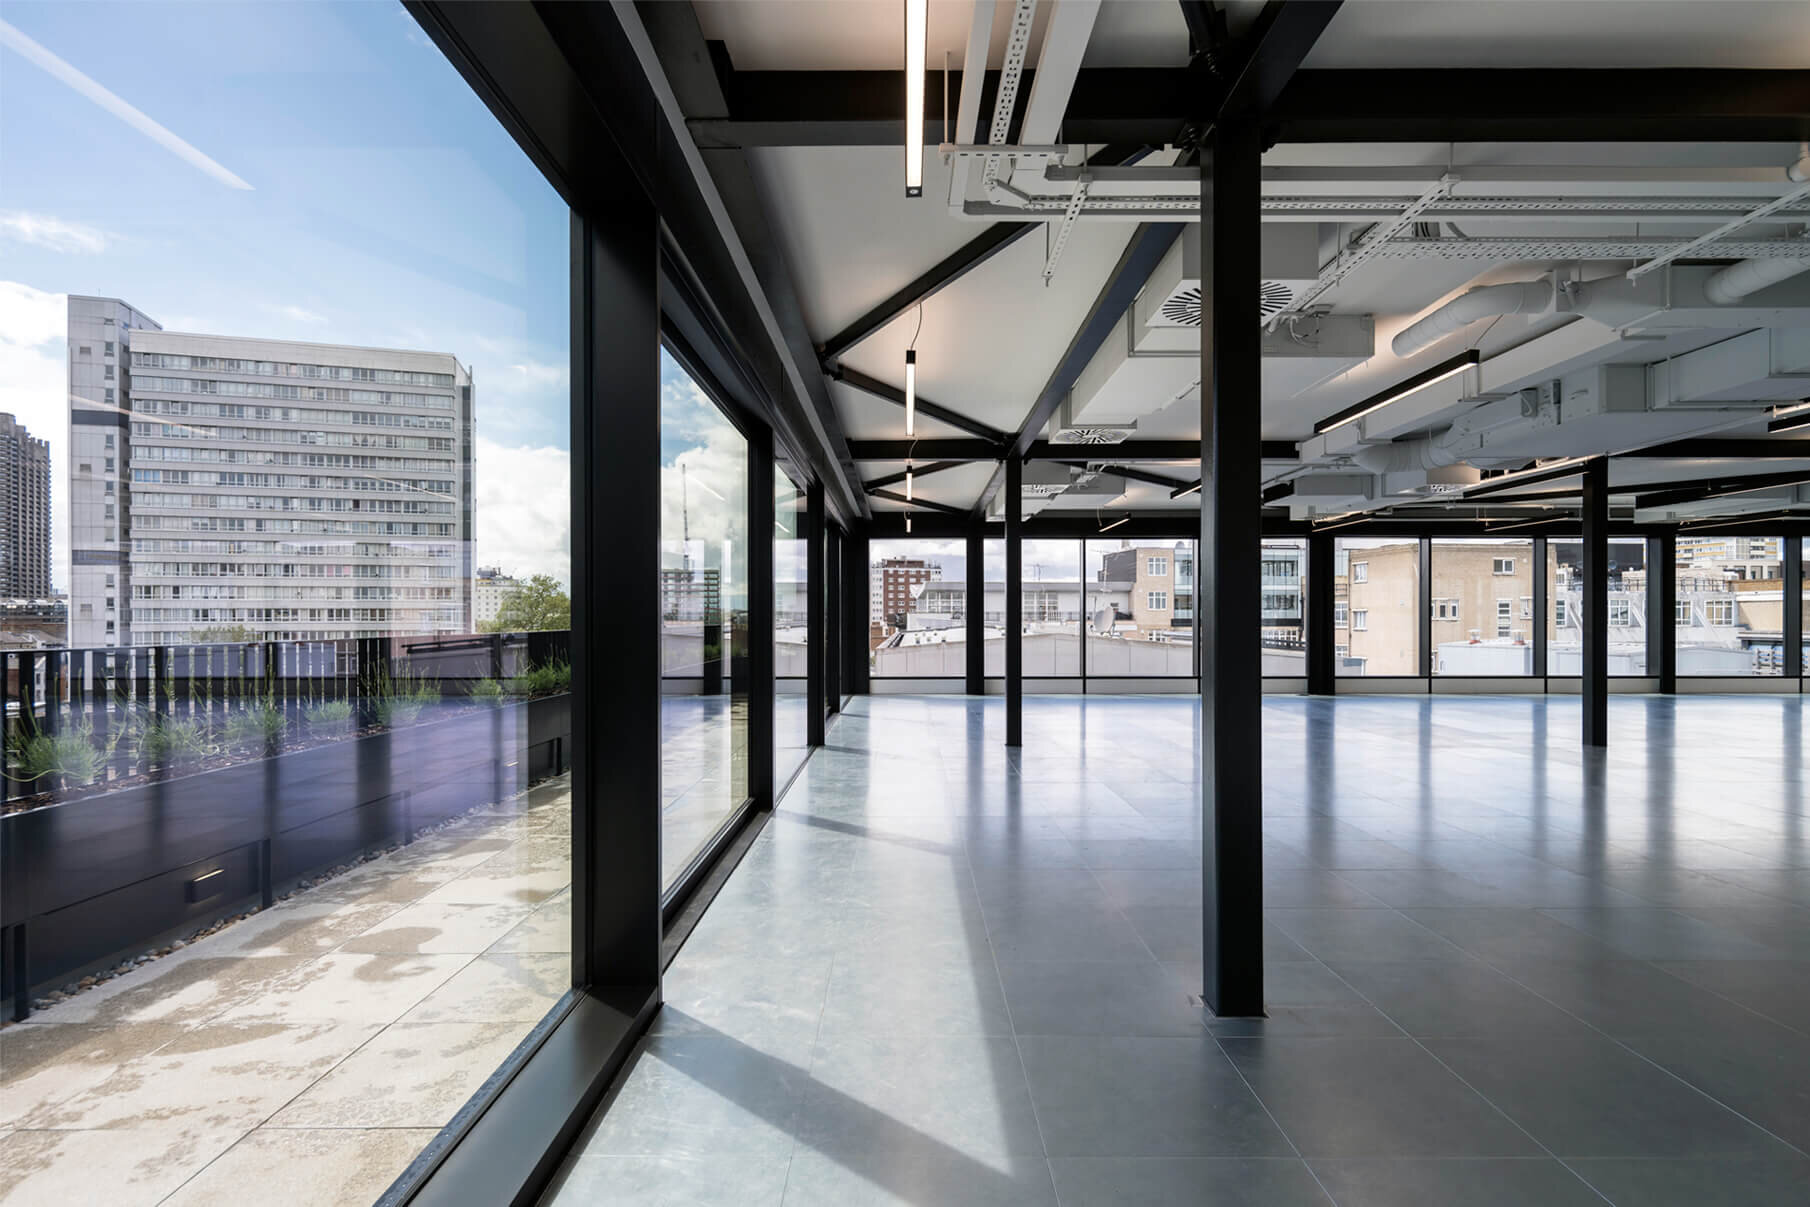 Fast-paced contemporary CAT A fitout with exposed concrete soffits at 44 Featherstone Road, London.